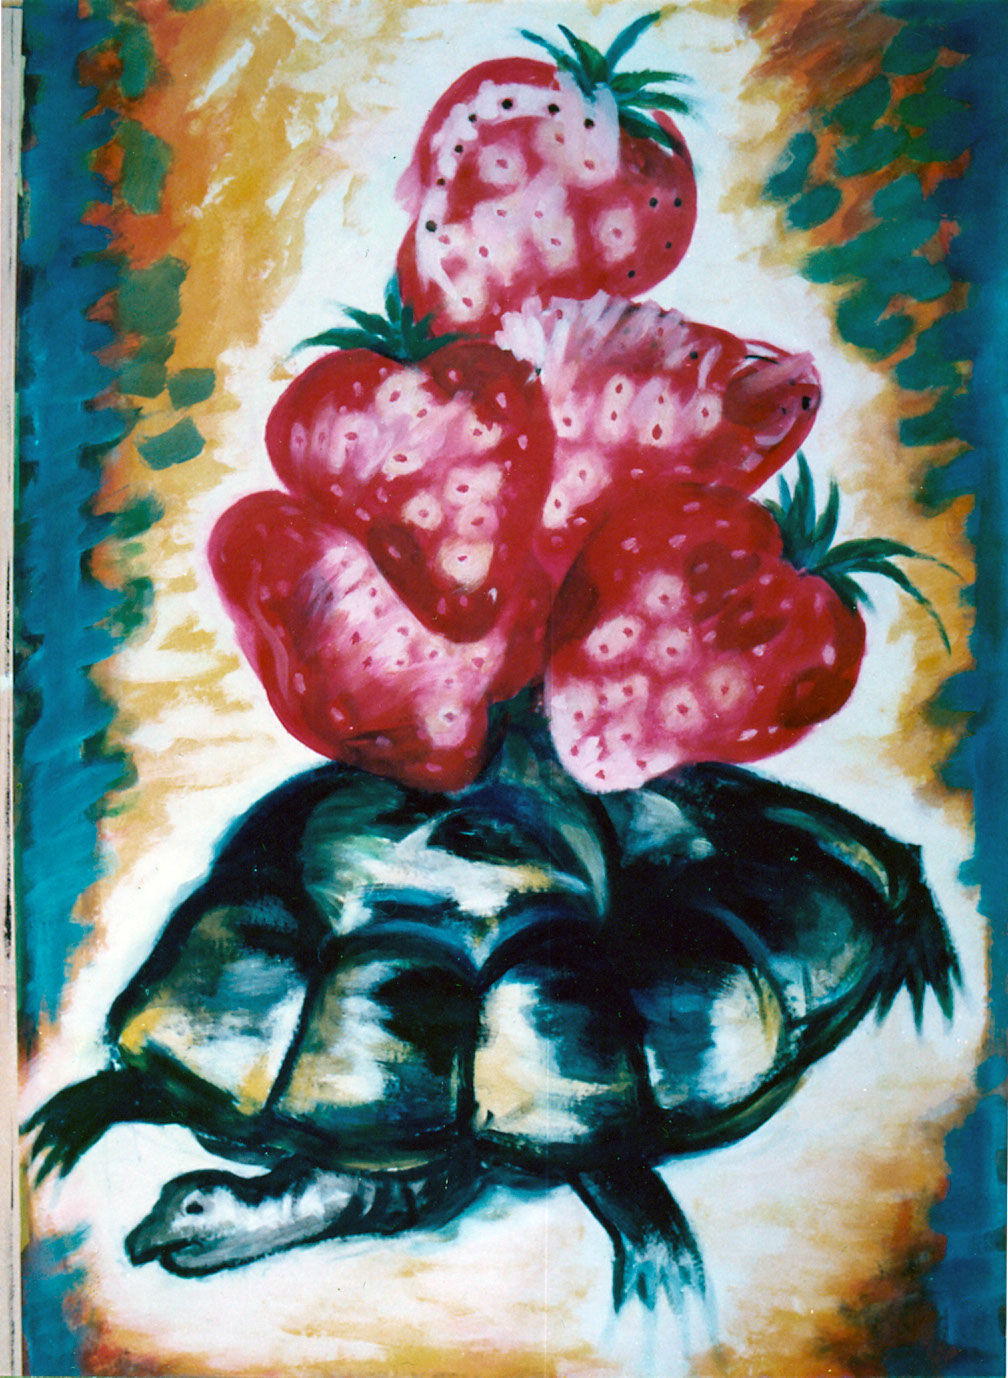 Title: August, 32
Materials: Acrylic on paper
Size: 240x150 cm
Year: 1986